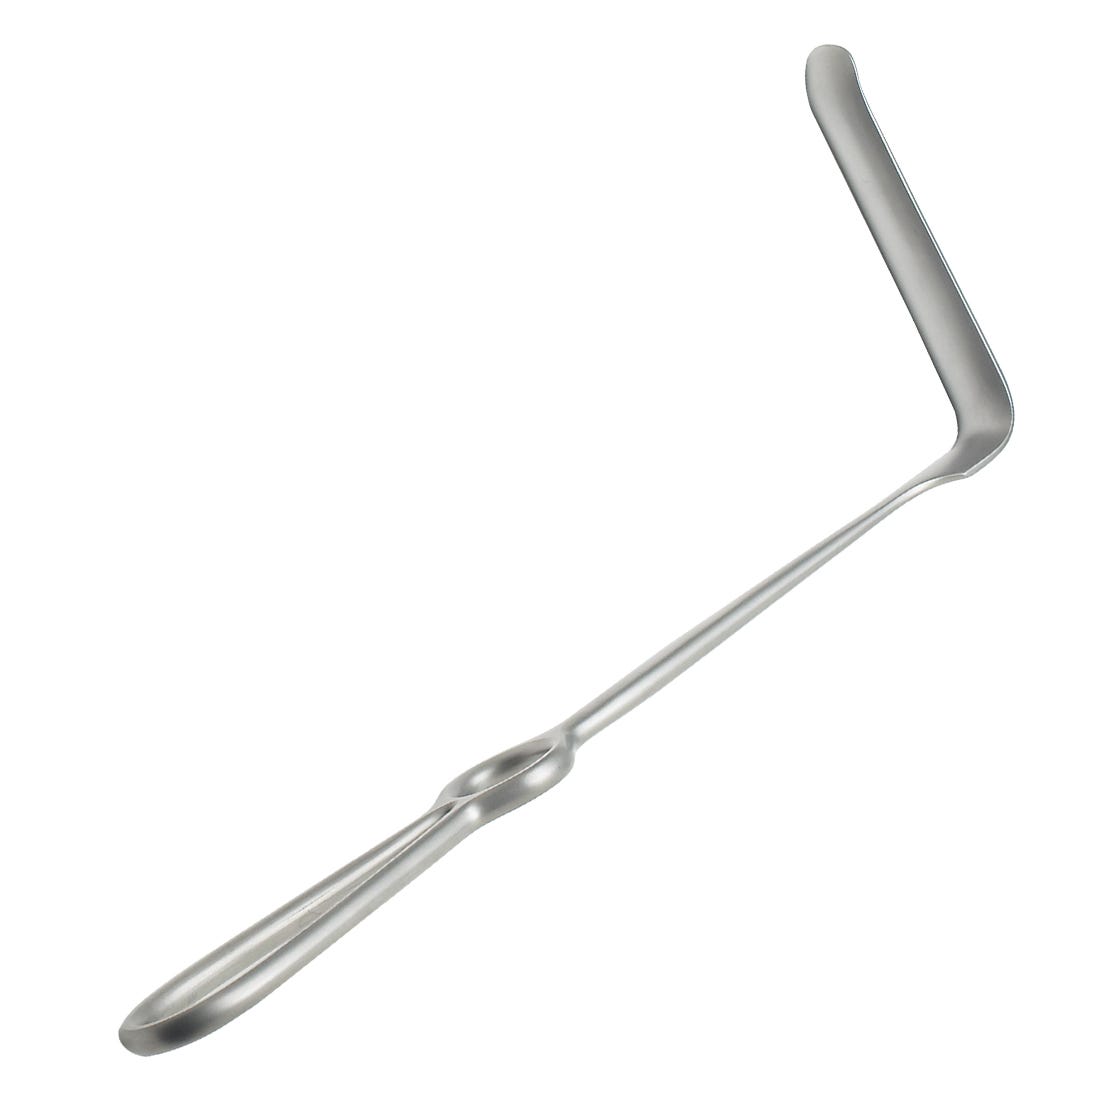 Obwegeser Type Surgical Retractor Concave, Curved Up, 16mm x 80mm